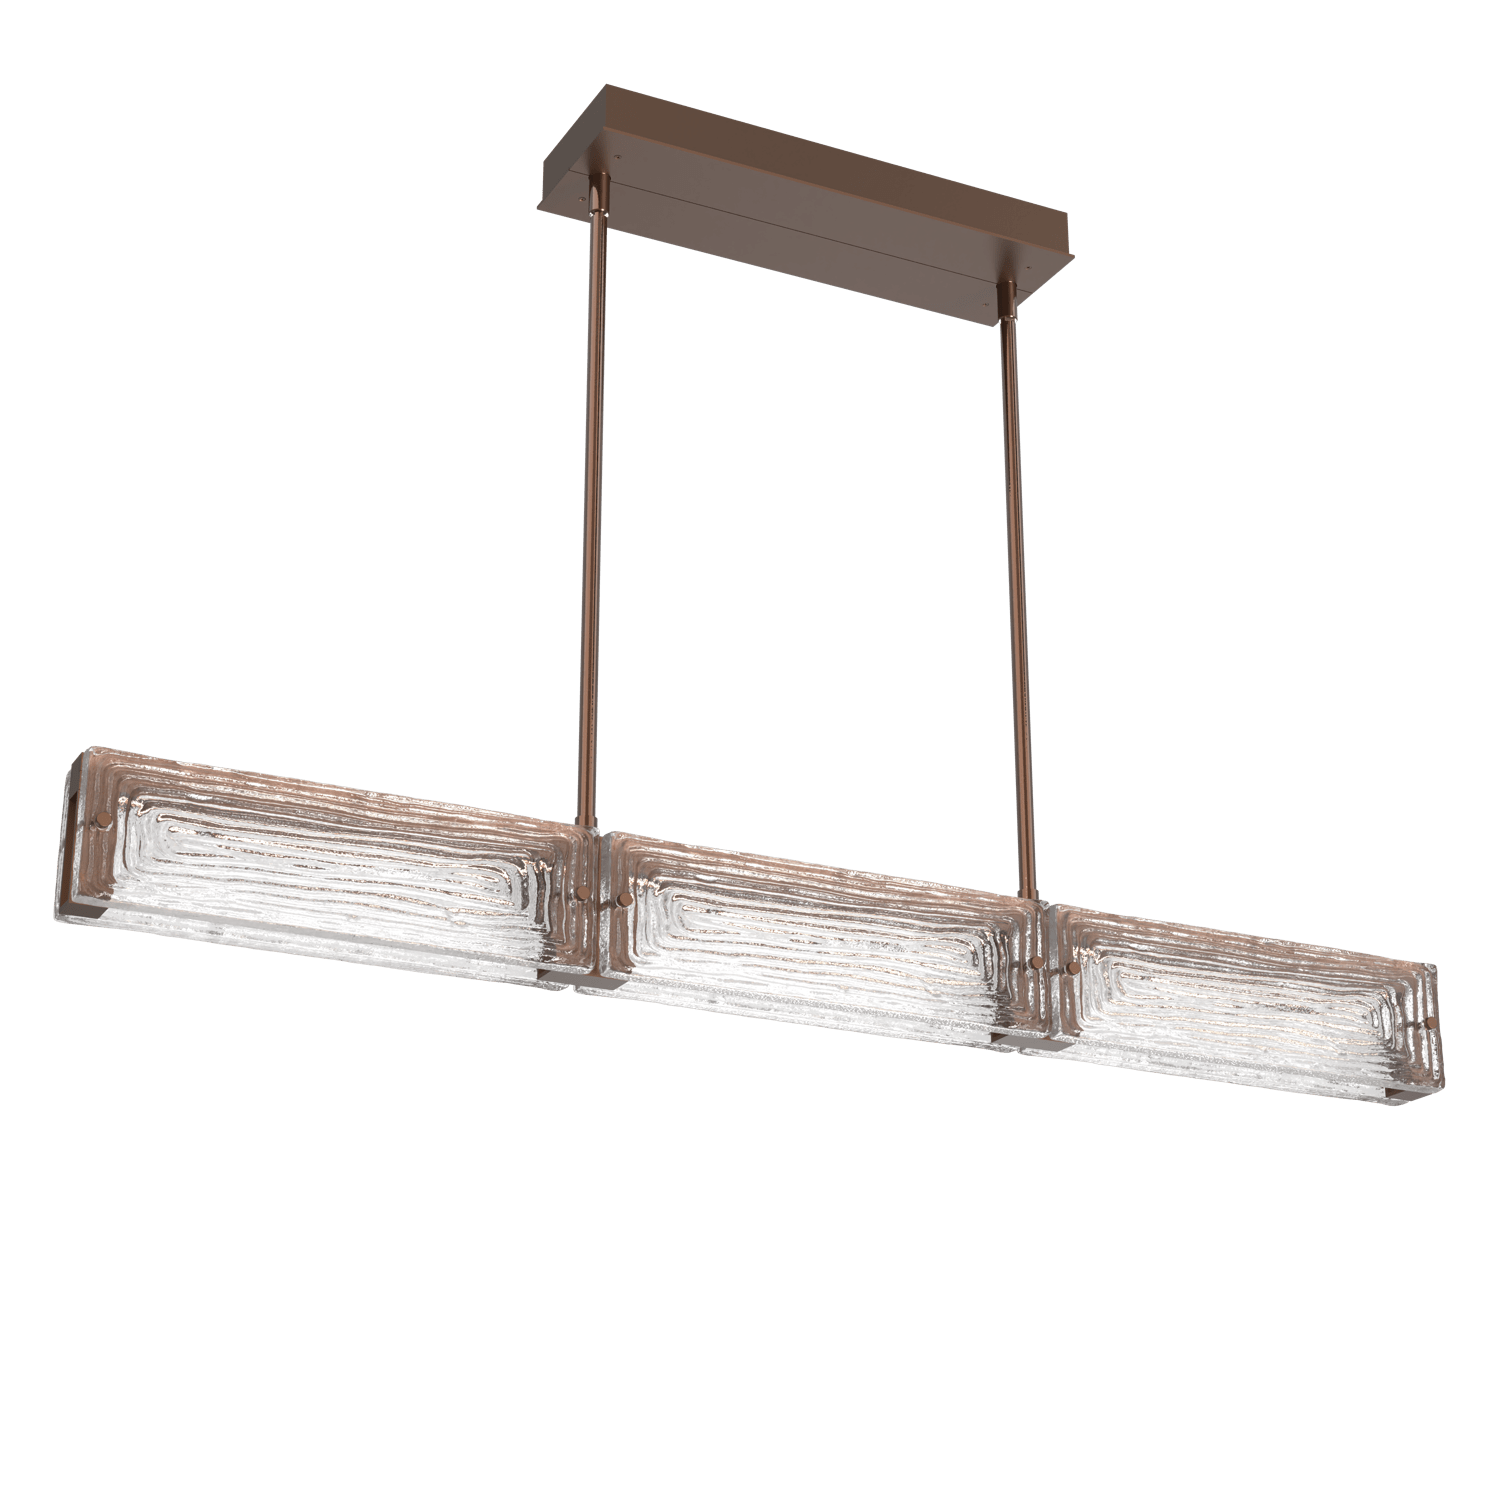 PLB0090-43-BB-TL-Hammerton-Studio-Tabulo-43-inch-linear-chandelier-with-burnished-bronze-finish-and-clear-linea-cast-glass-shade-and-LED-lamping